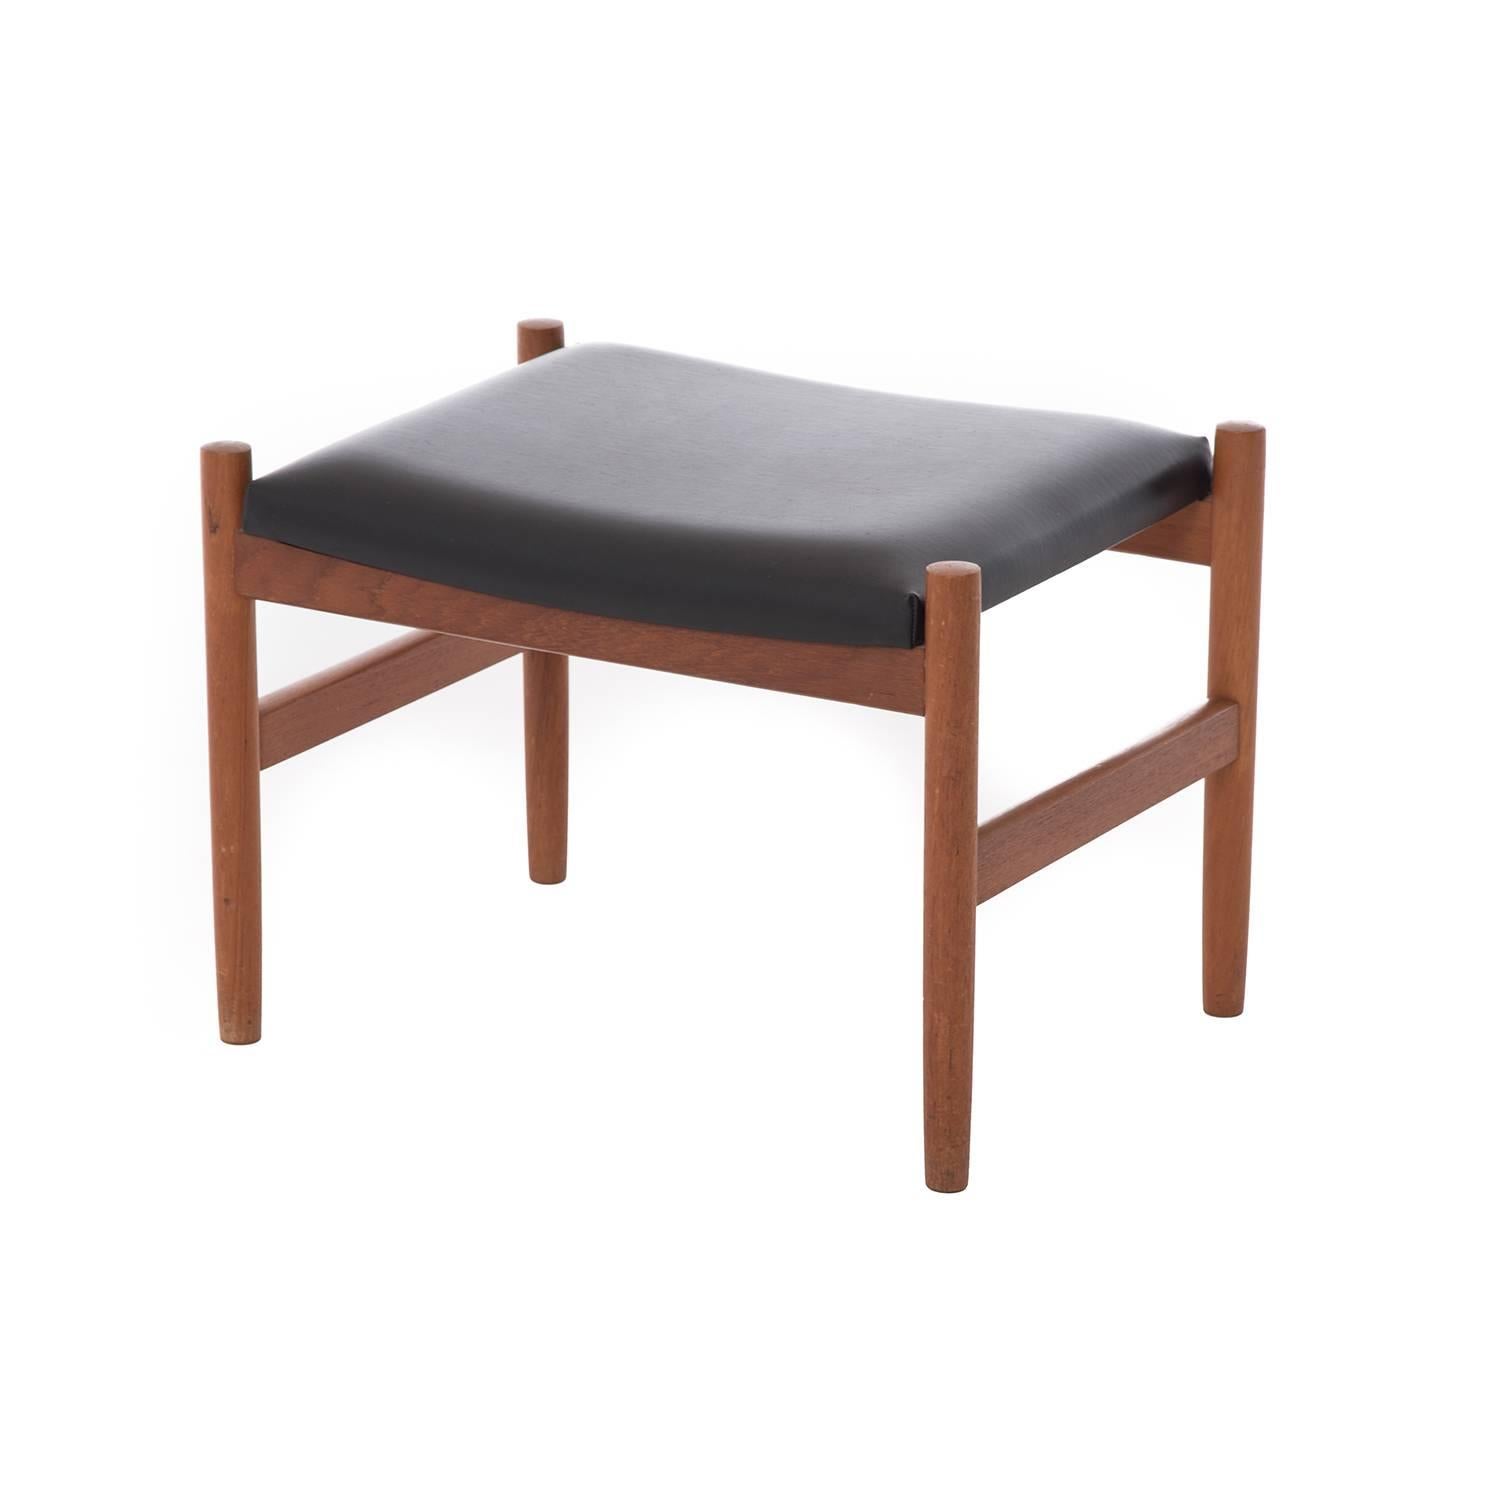 Simple yet unique, this stool has Classic Mid-Century style. 

Professional, skilled furniture restoration is an integral part of what we do every day. Our goal is to provide beautiful, functional furniture that honors its illustrious past. Our